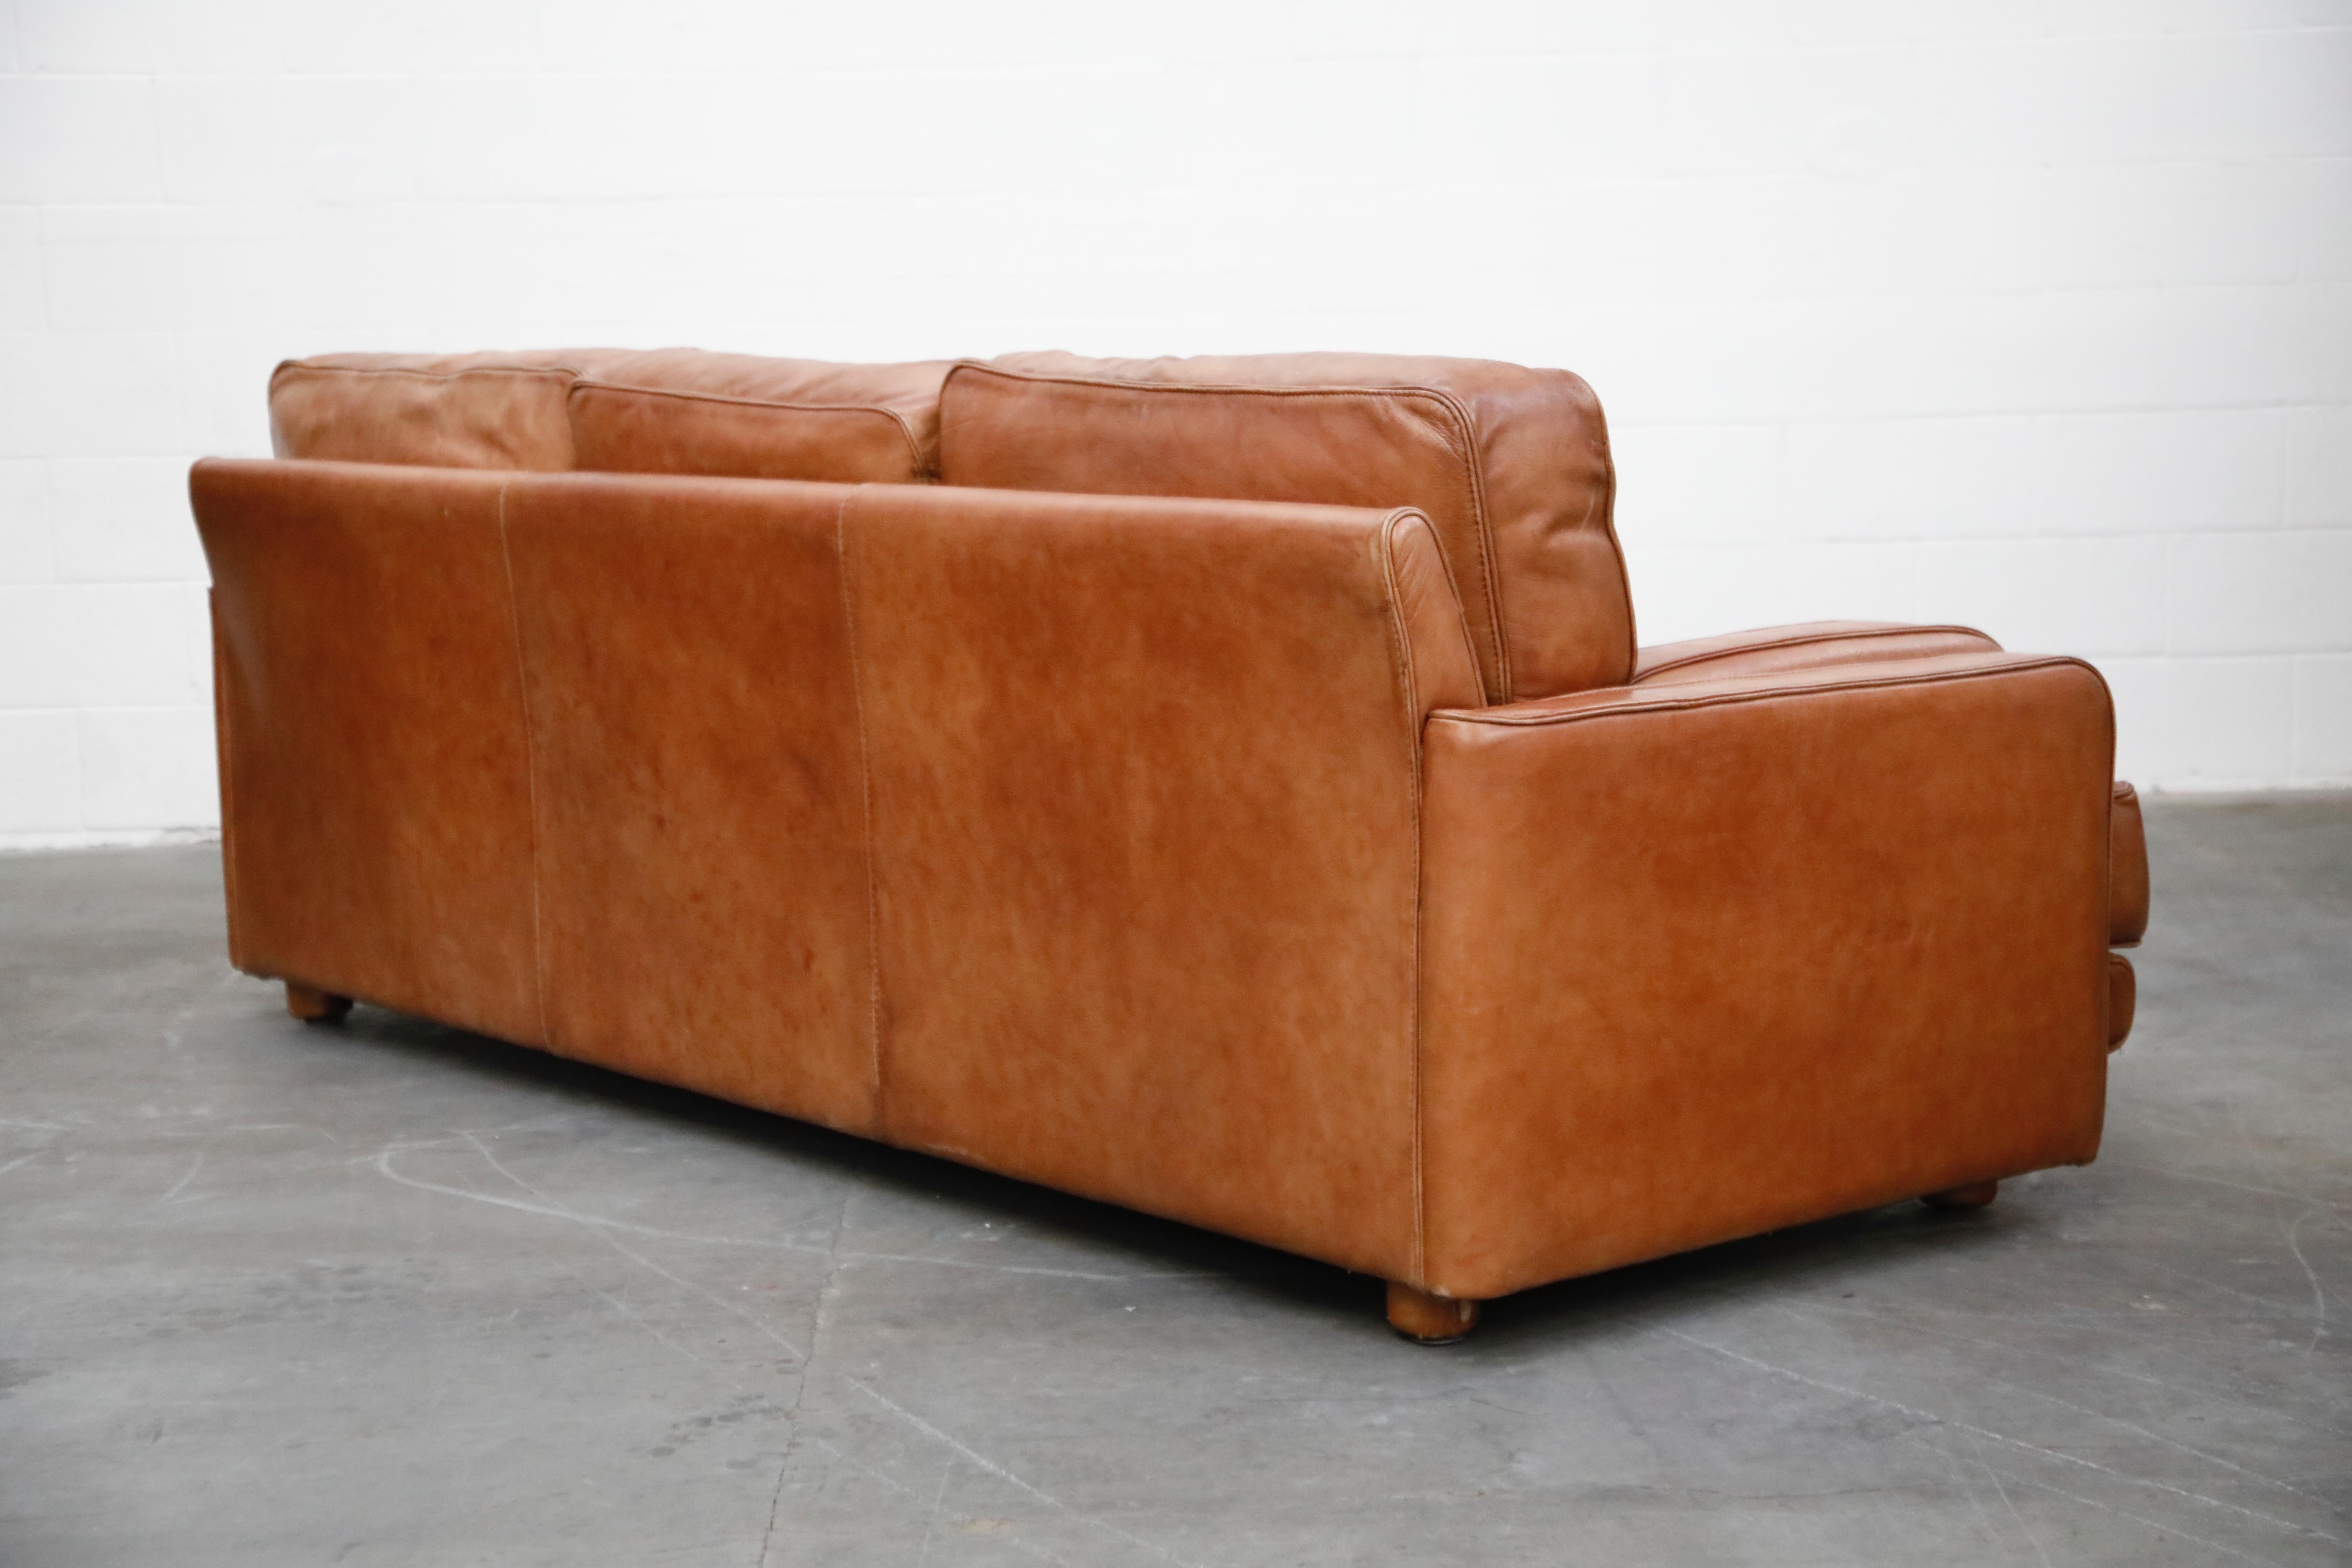 Late 20th Century Italian Deep Seated Waterfowl Feather and Leather Sofa by Natuzzi, circa 1970s